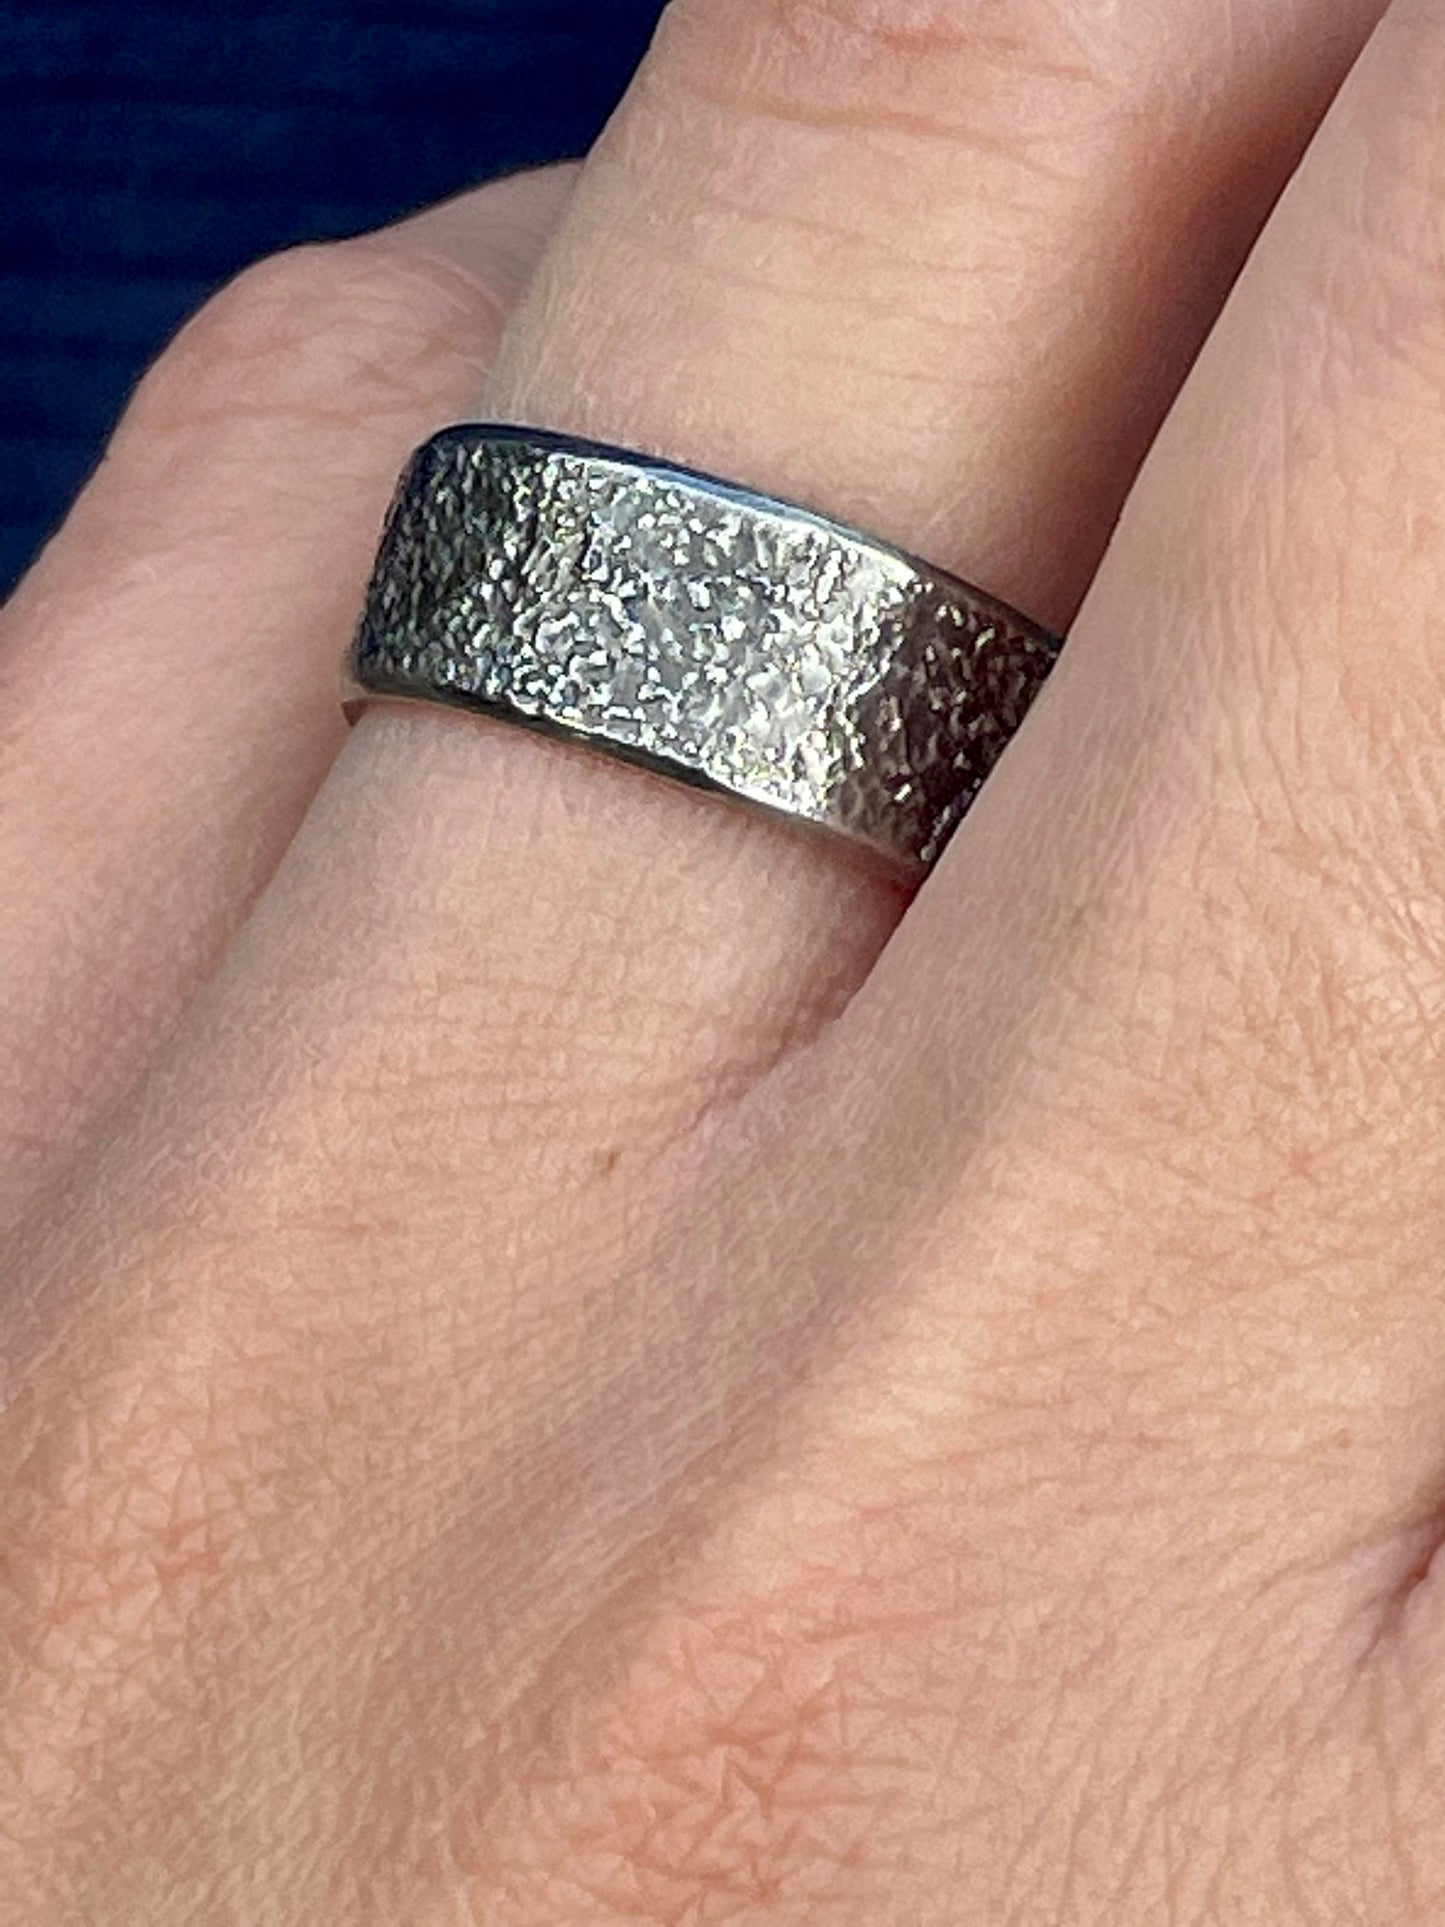 Unisex handmade wedding band- Textured, reticulated Silver. One of a kind, Hallmarked by the Birmingham Assay Office